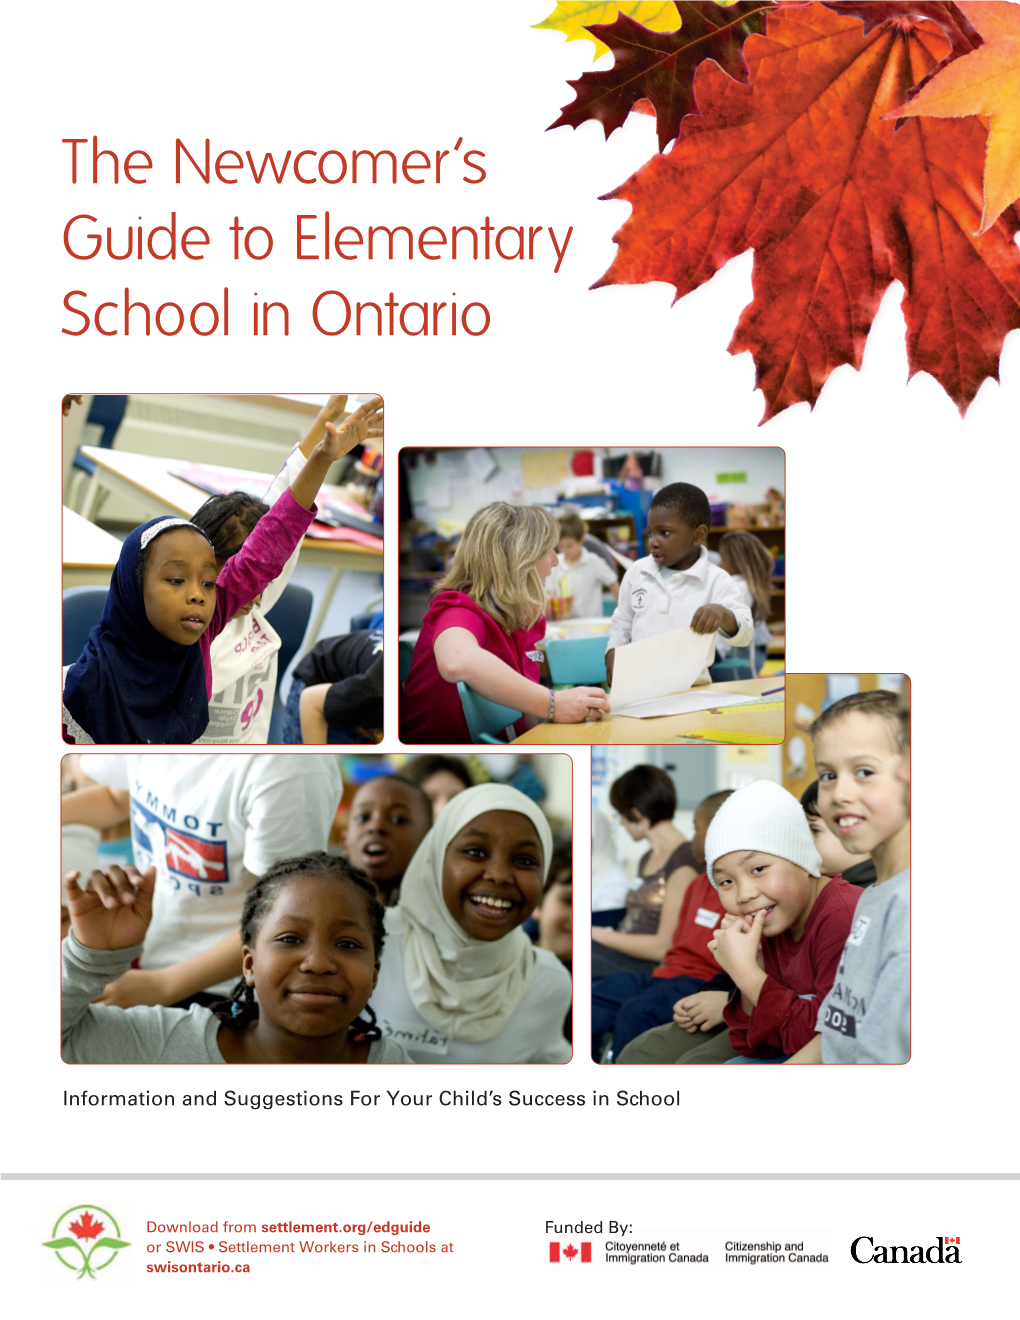 The Newcomer's Guide to Elementary School in Ontario